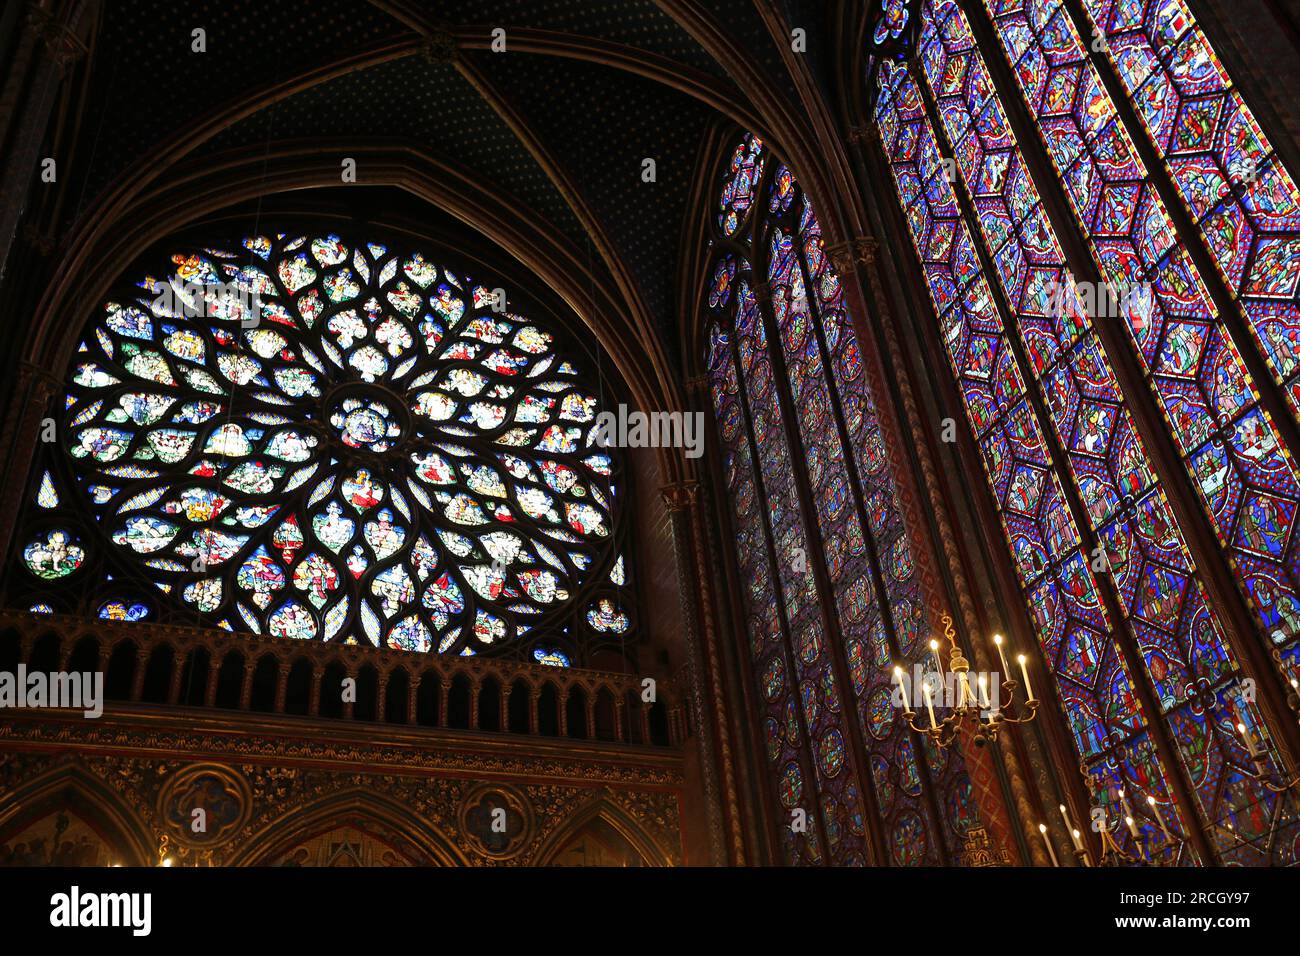 The rose and the window - Sainte-Chapelle, Paris, France Stock Photo